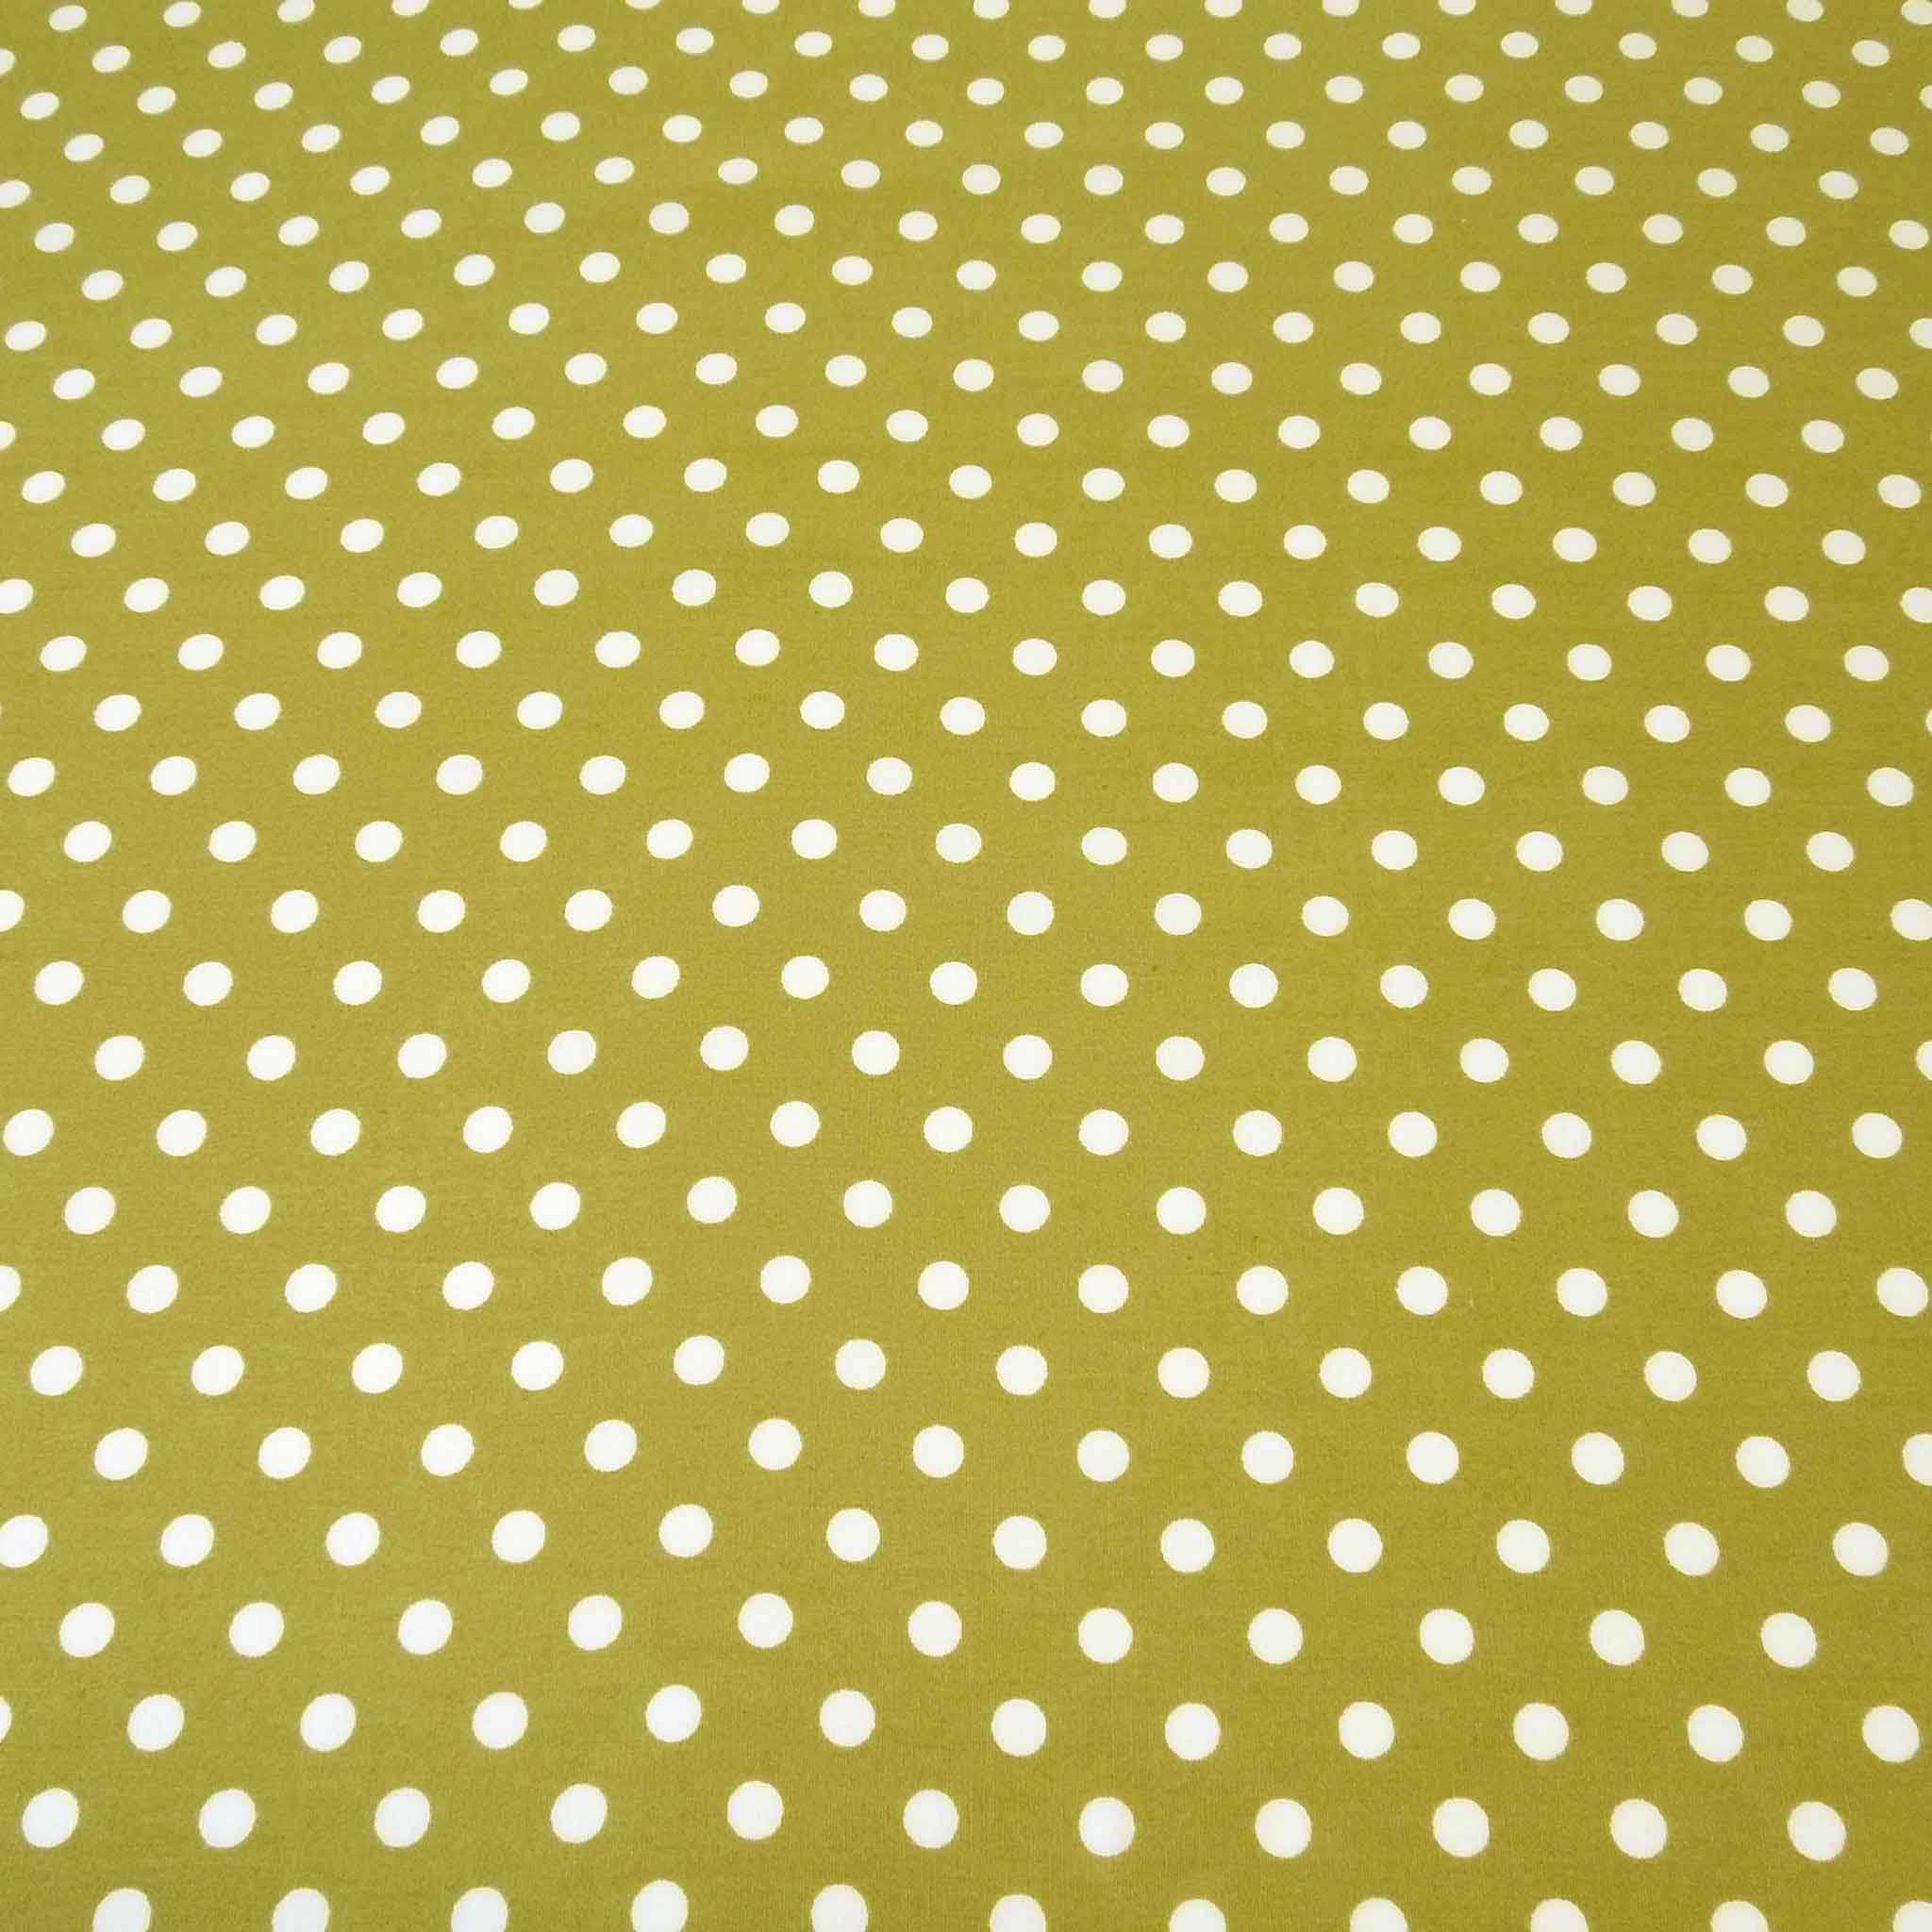 Polka Dot Olive Green Poplin Cotton Fabric by Rose & Hubble